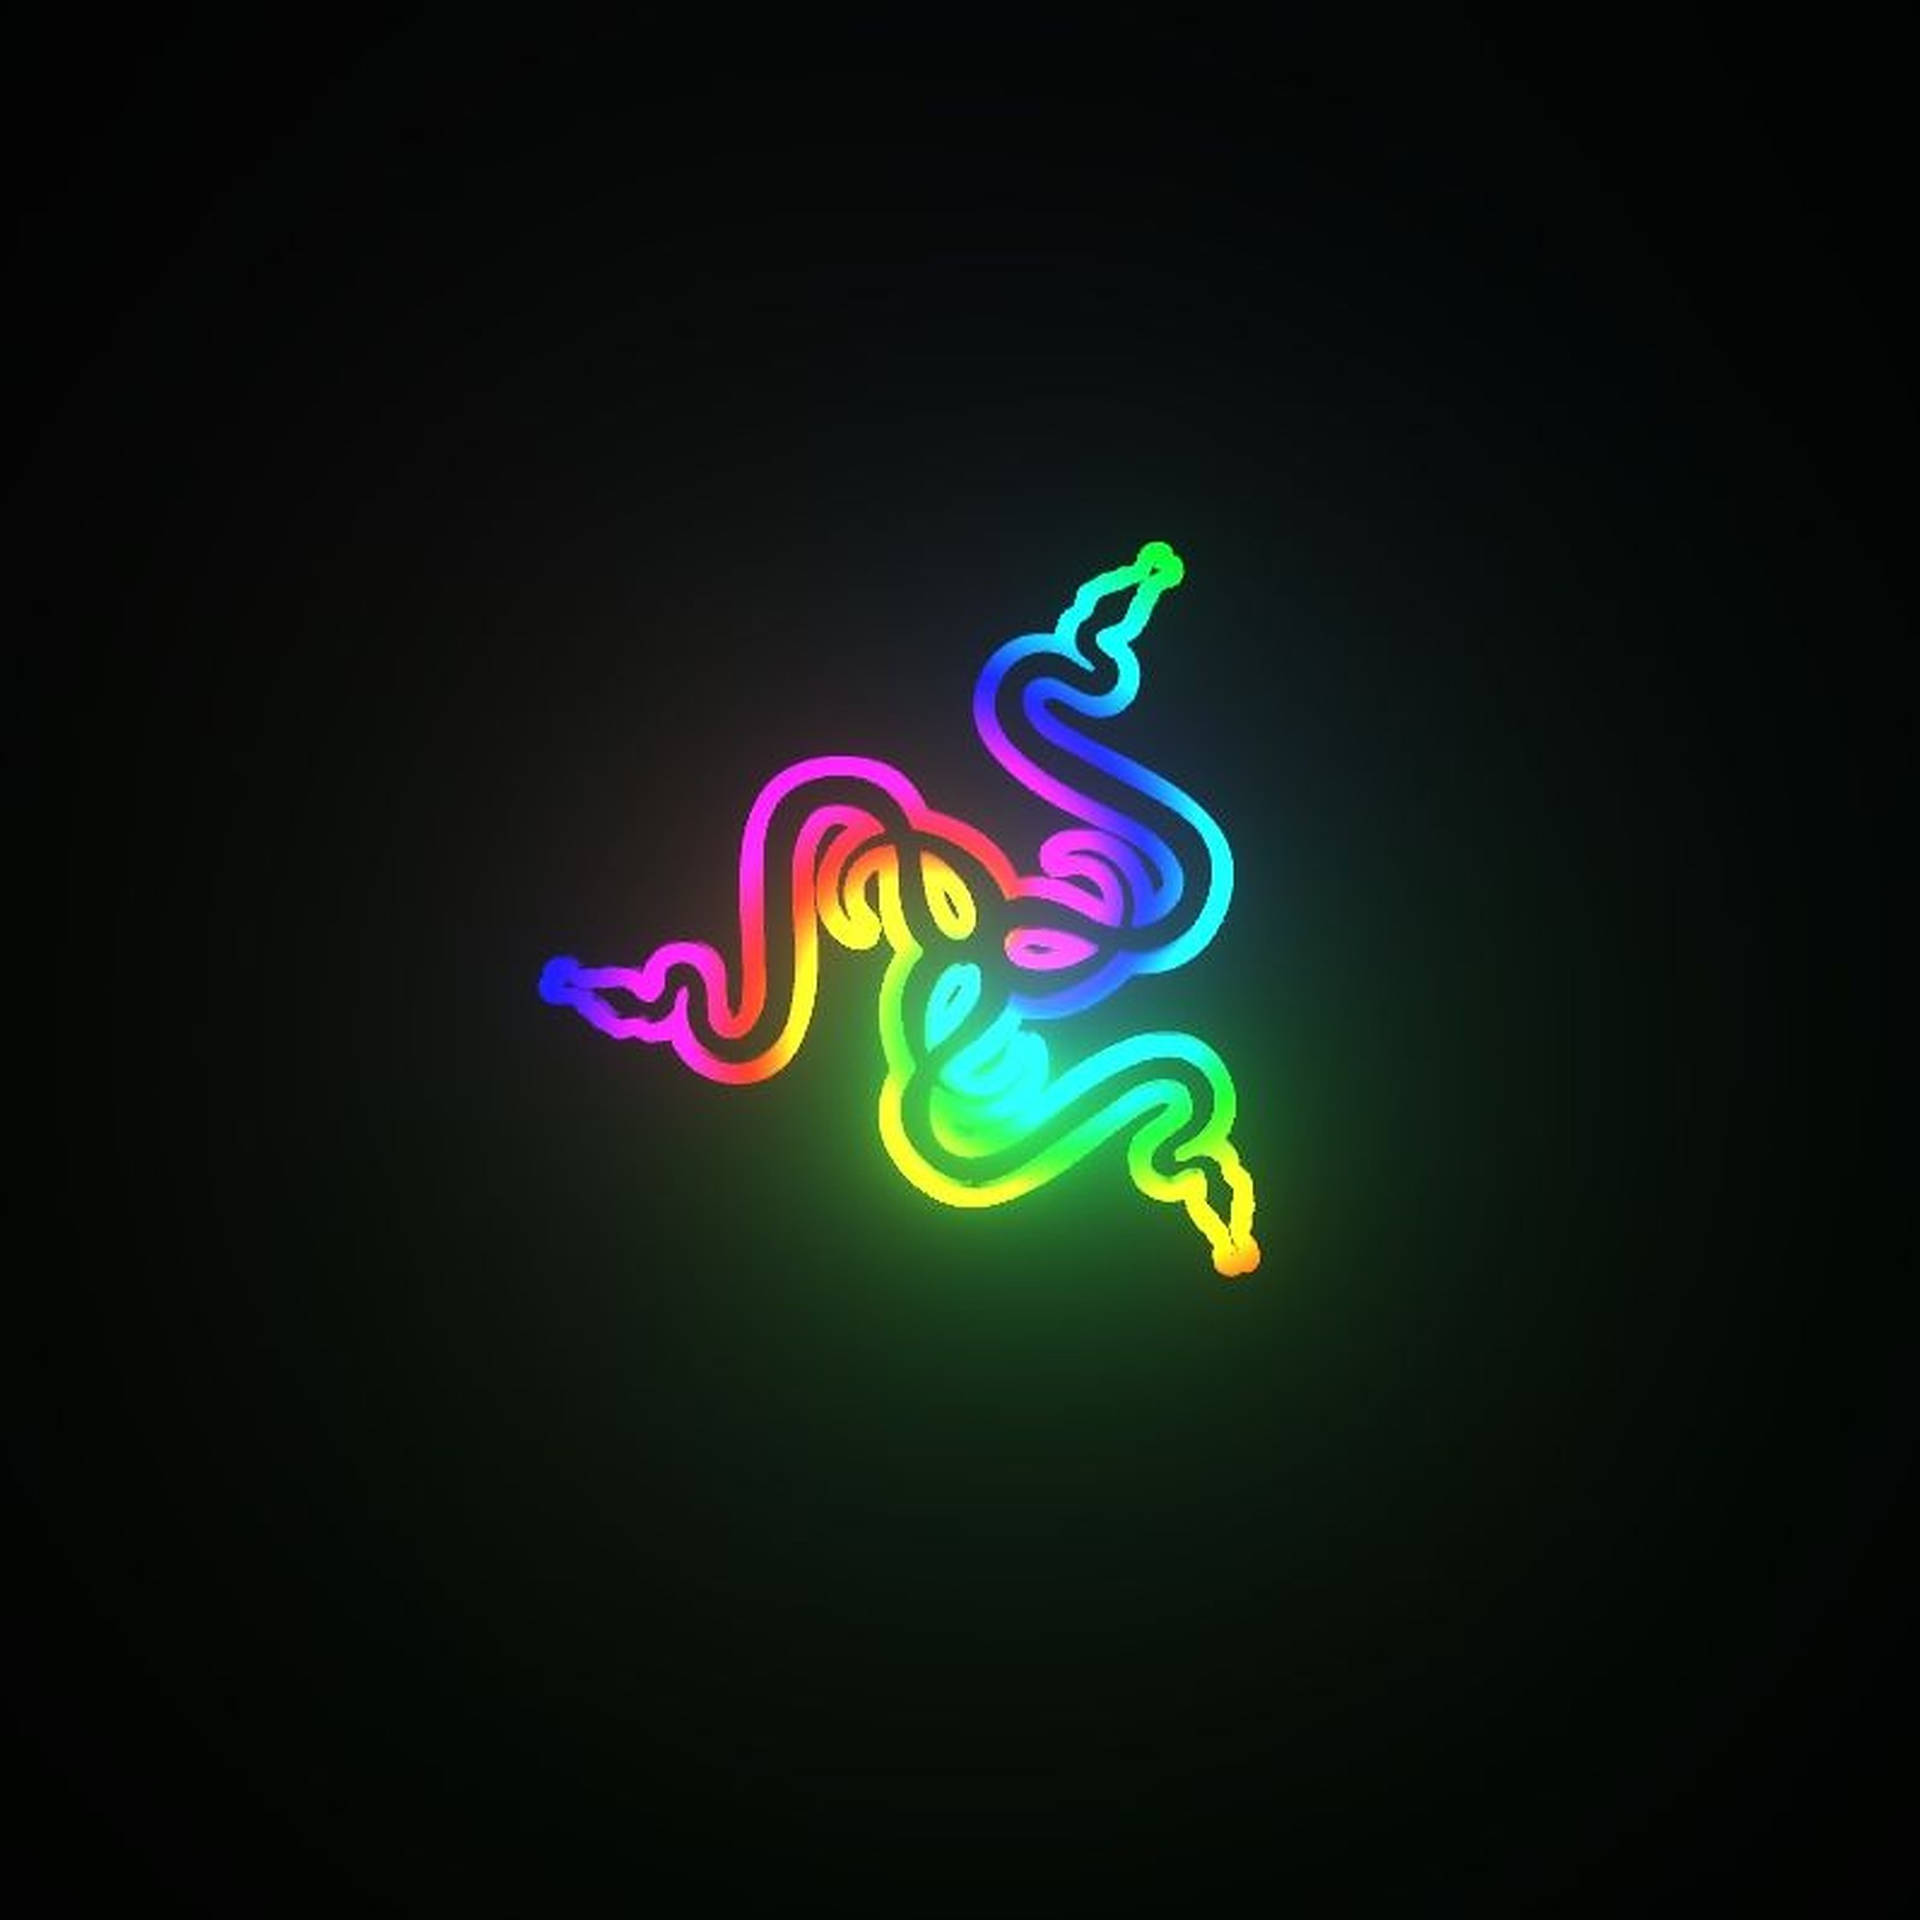 2136X2136 Led Wallpaper and Background